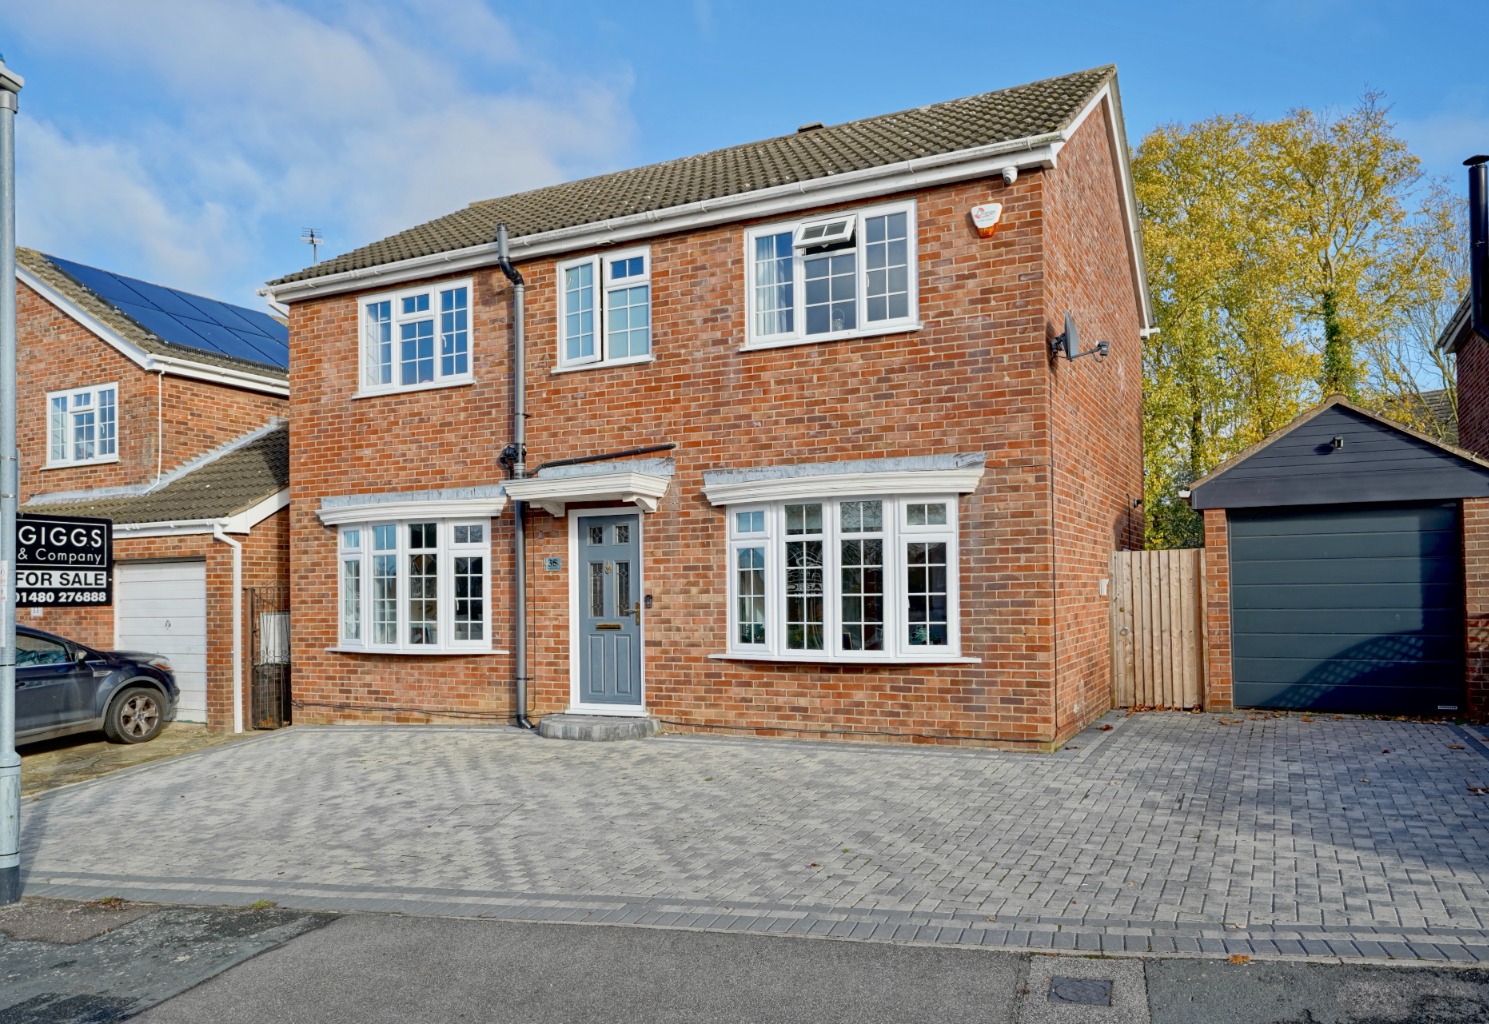 4 bed detached house for sale in Meadow Way, St Neots  - Property Image 3